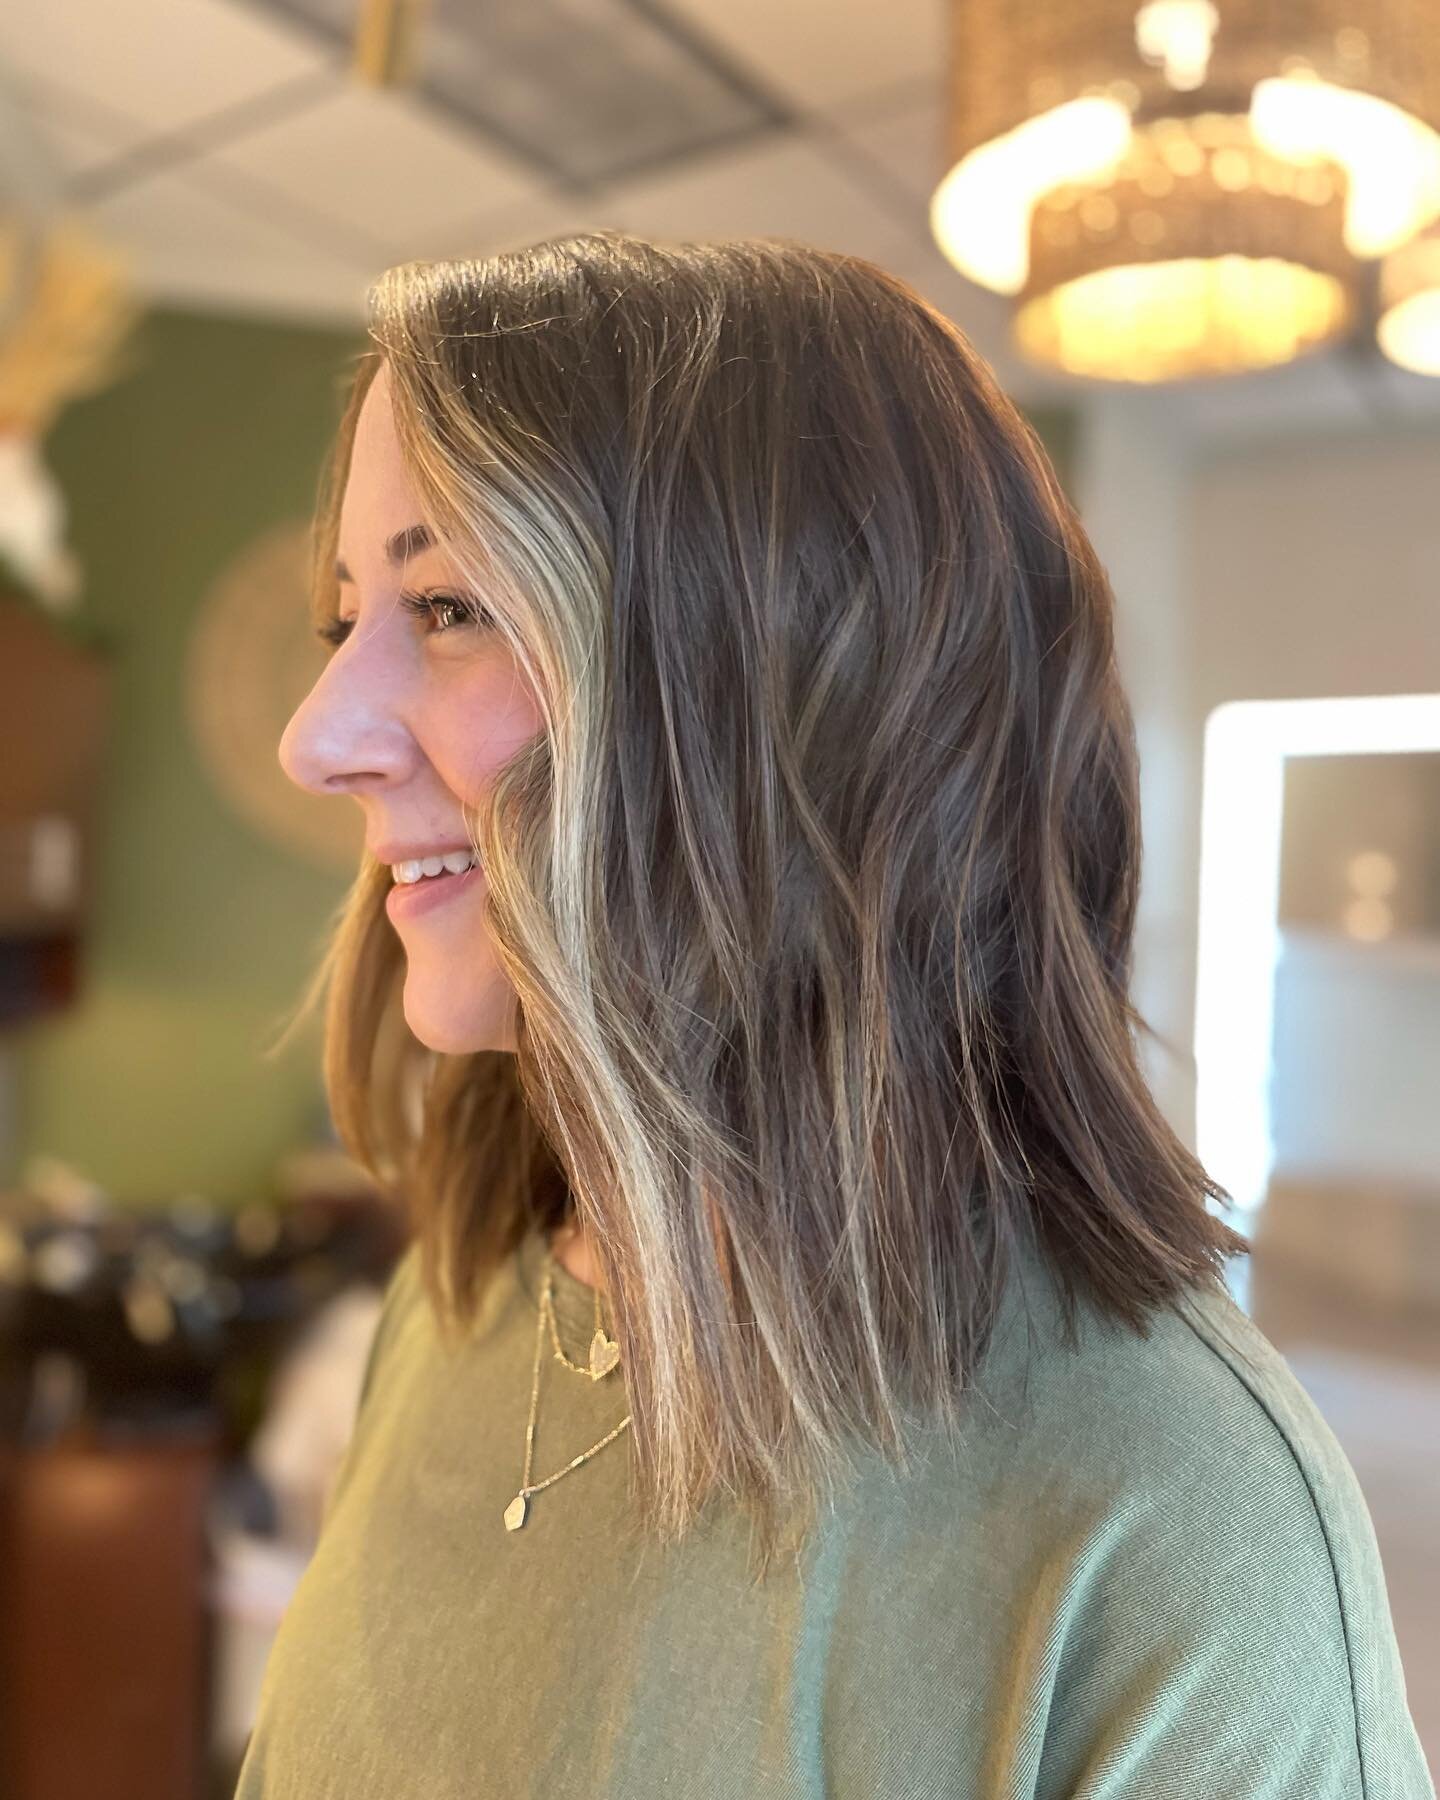 @karah_b_smith was ready for something new and sassy! We chopped off a few inches and freshened up her with some brightness around her face

Who else wants to feel fresh and ready for spring?